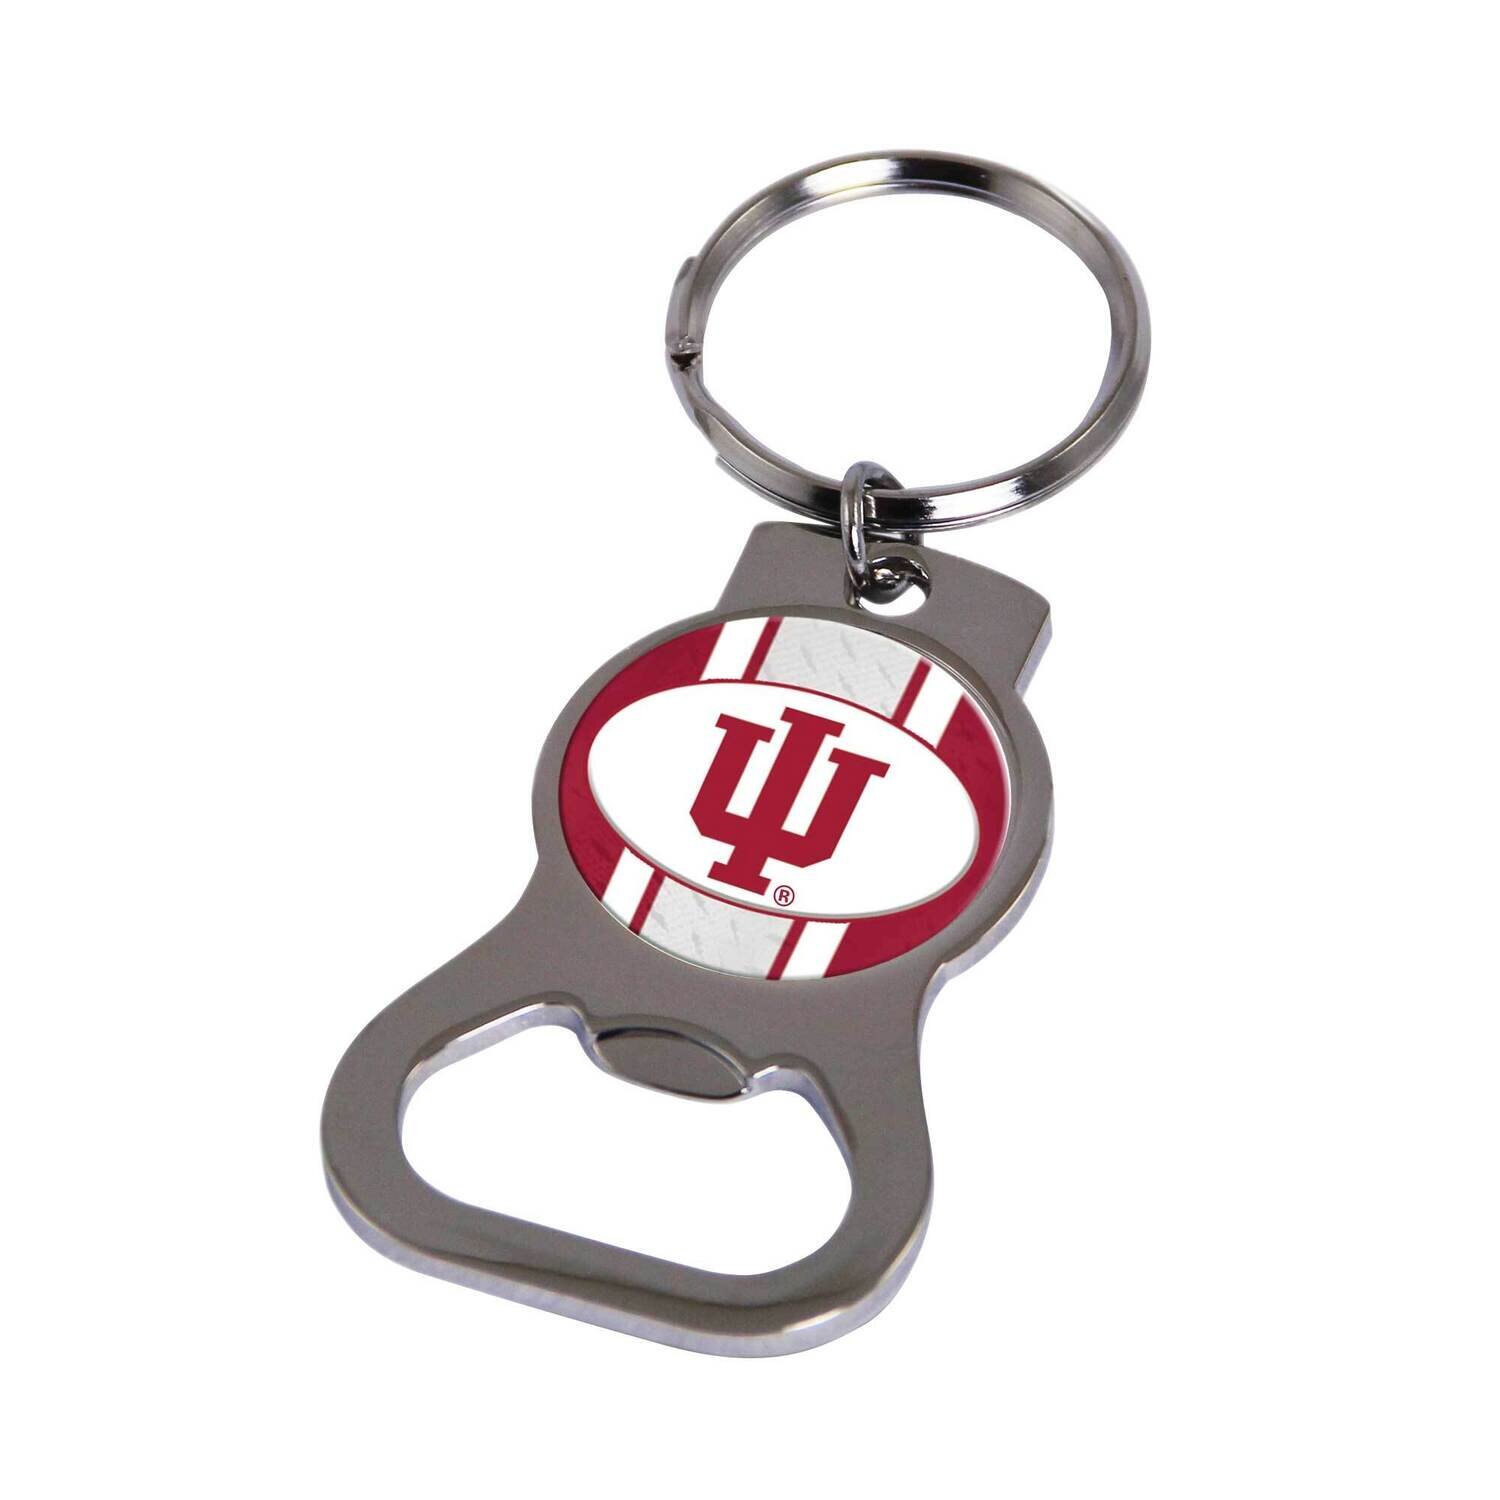 Ncaa Indiana Bottle Opener Key Ring By Rico Industries GC6400